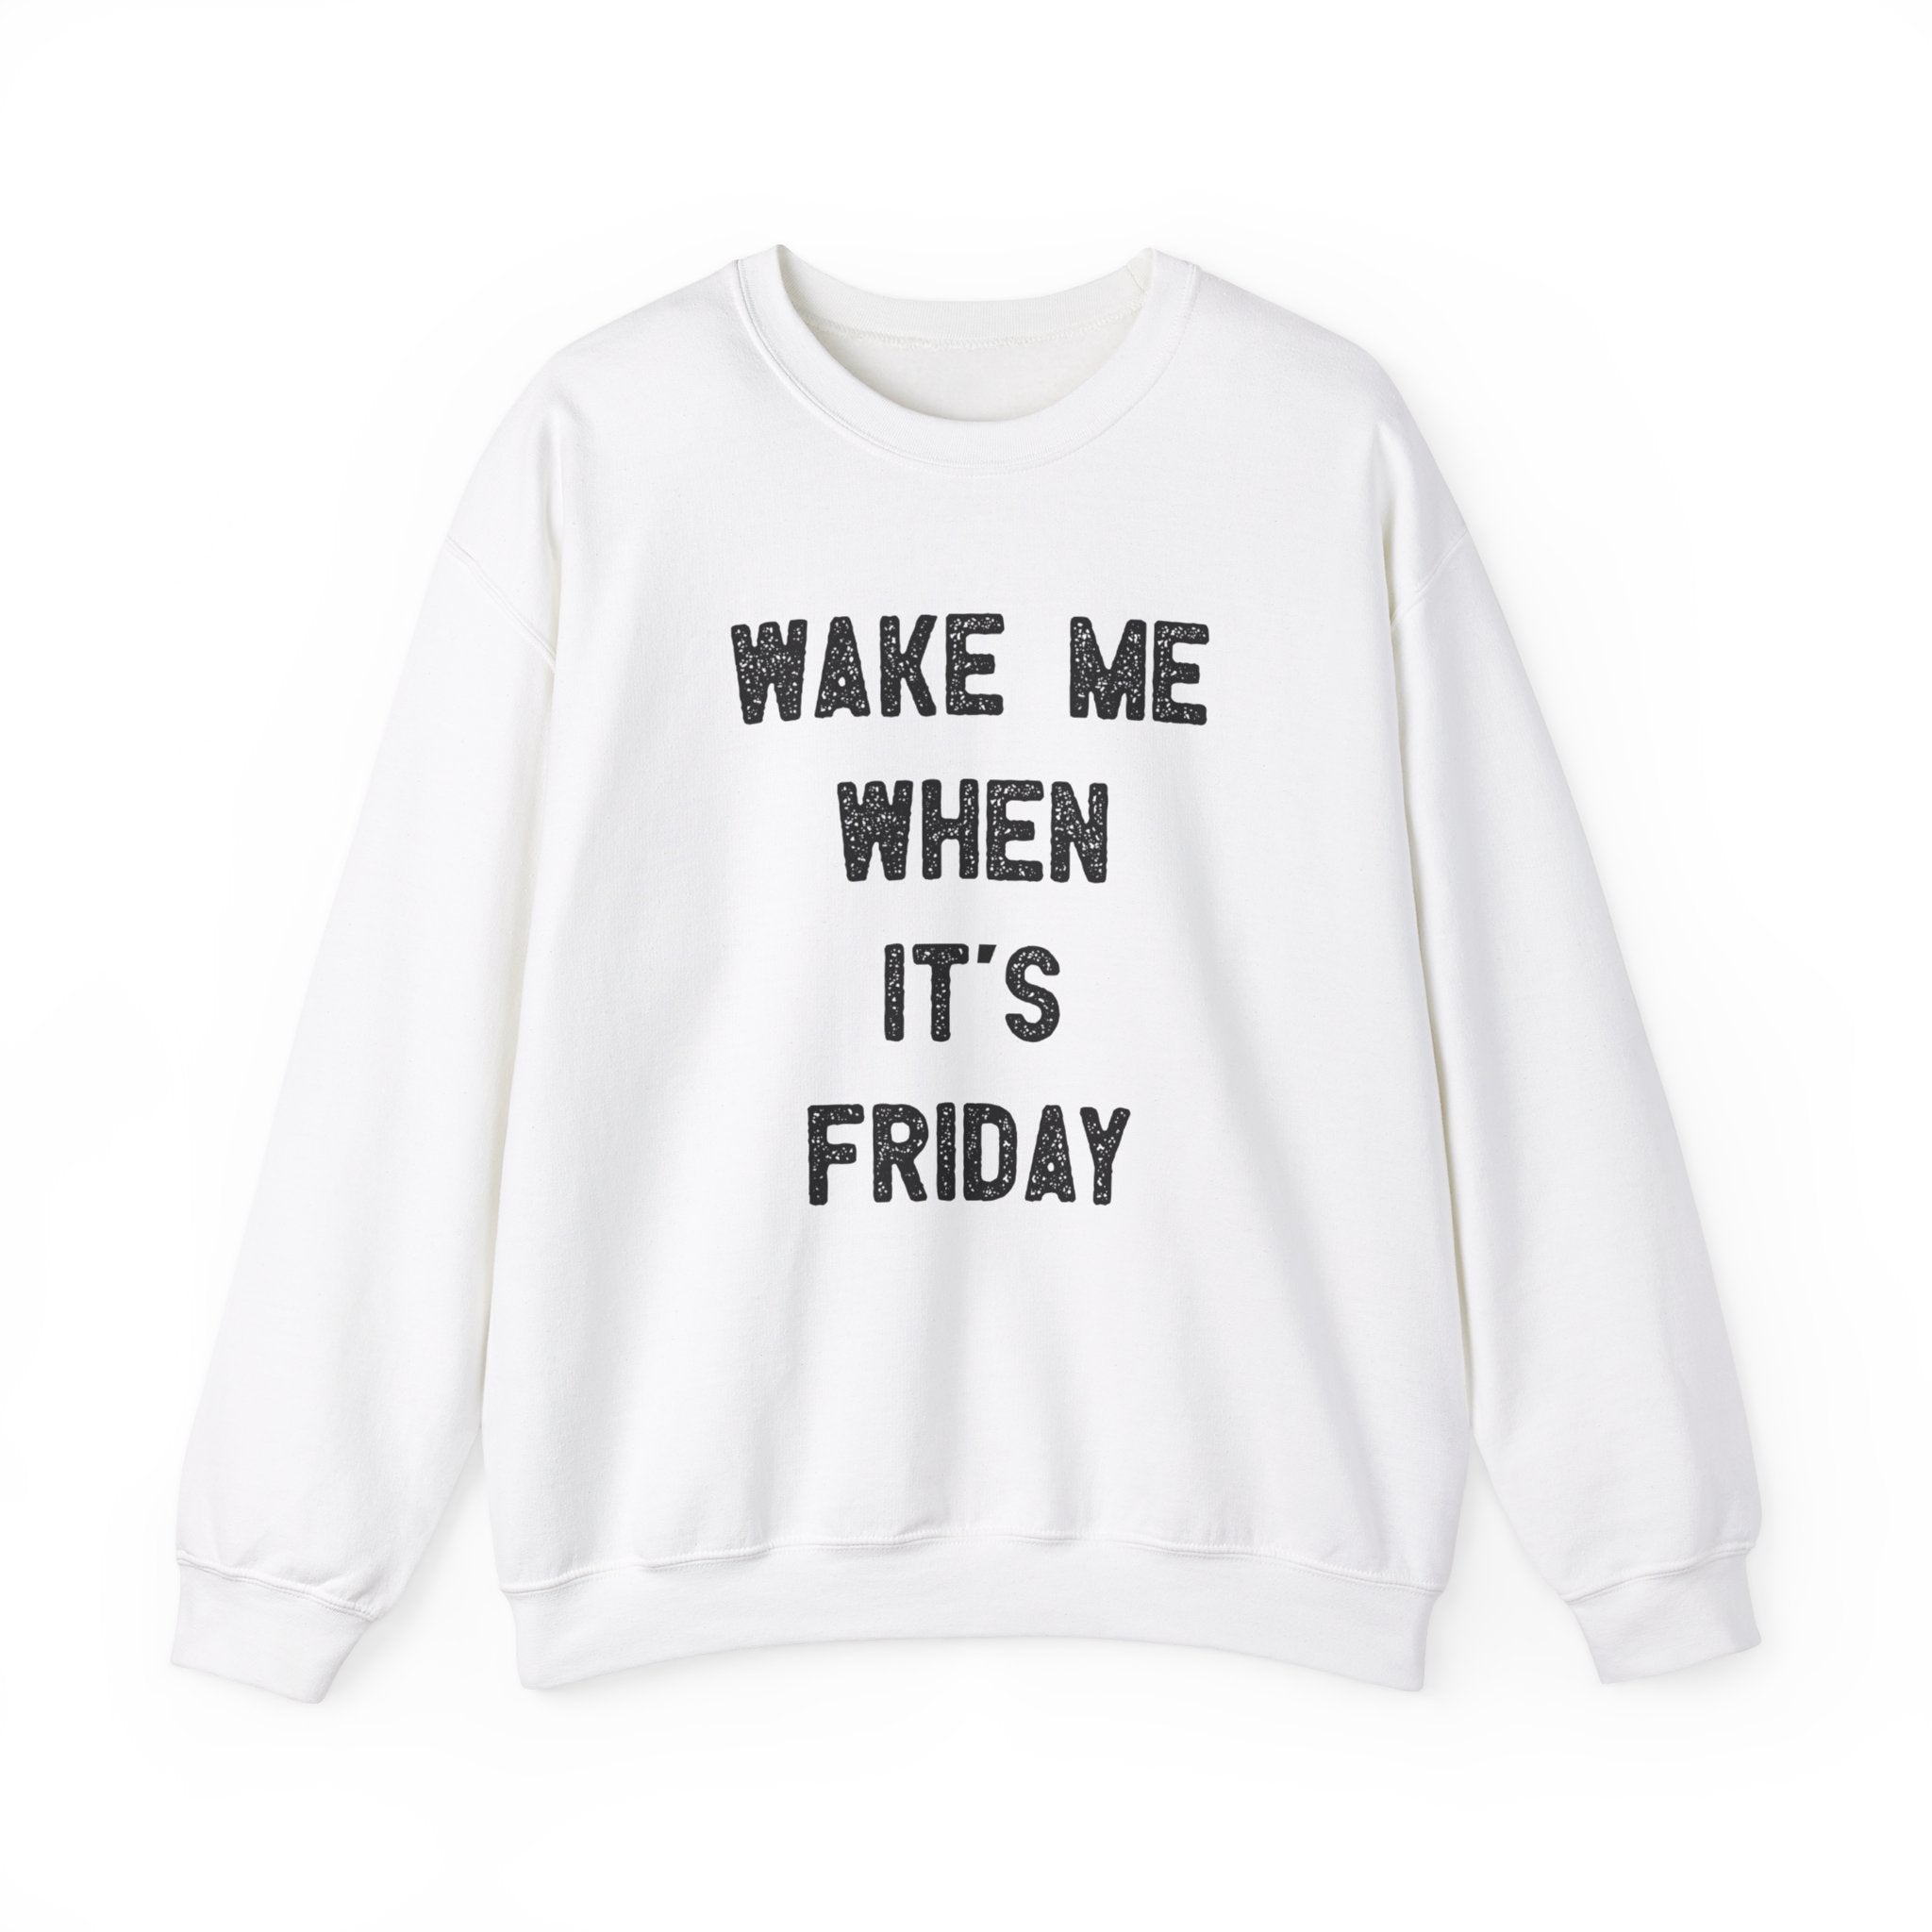 A stylish Wake Me When It's Friday - Sweatshirt with the text "WAKE ME WHEN IT'S FRIDAY" printed in bold black capital letters on the front, perfect for a cozy day.